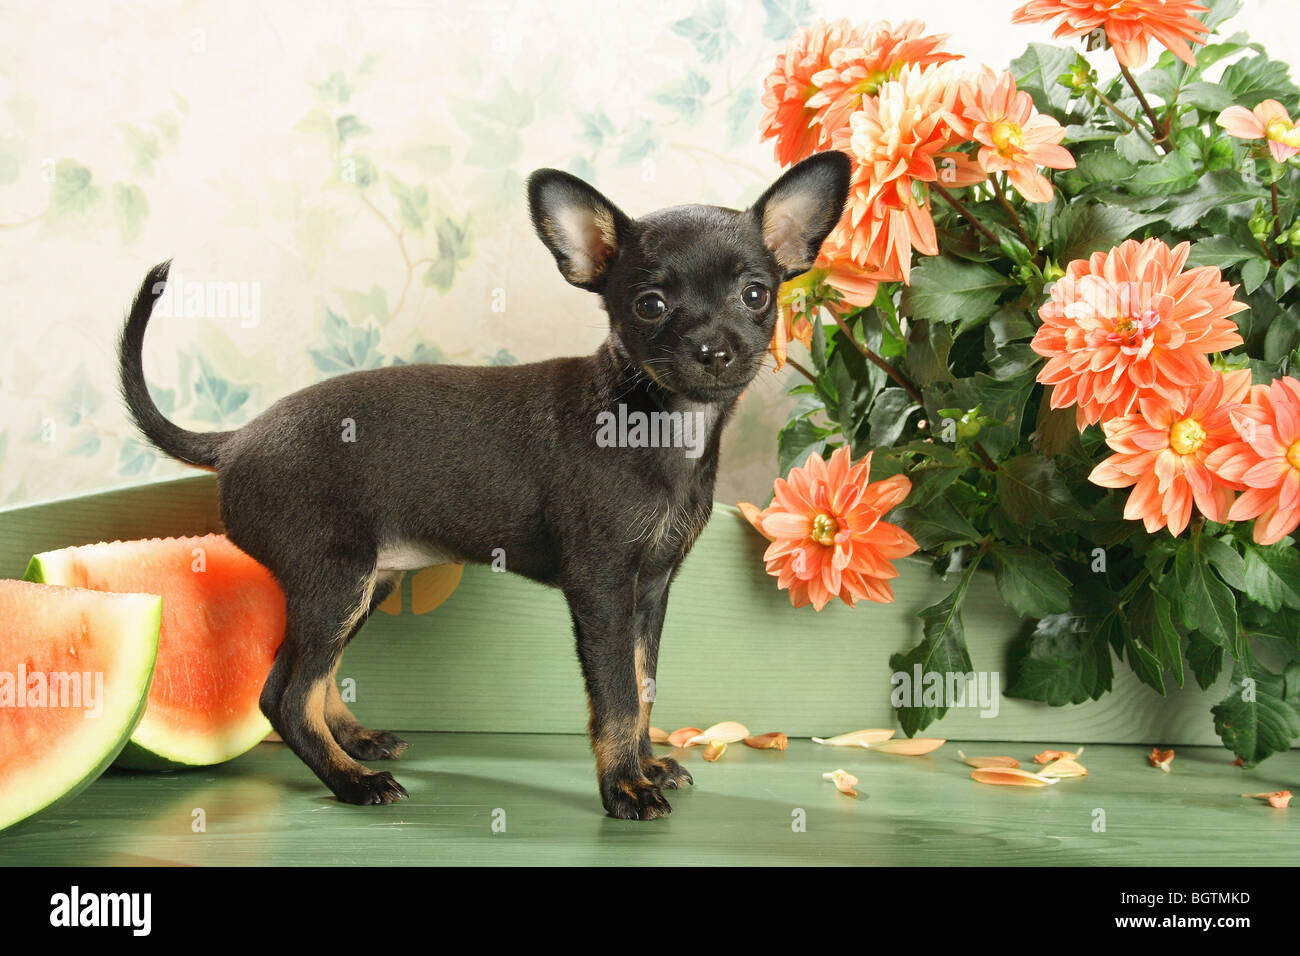 Russian Toy Terrier dog - puppy standing next to flowers Stock Photo